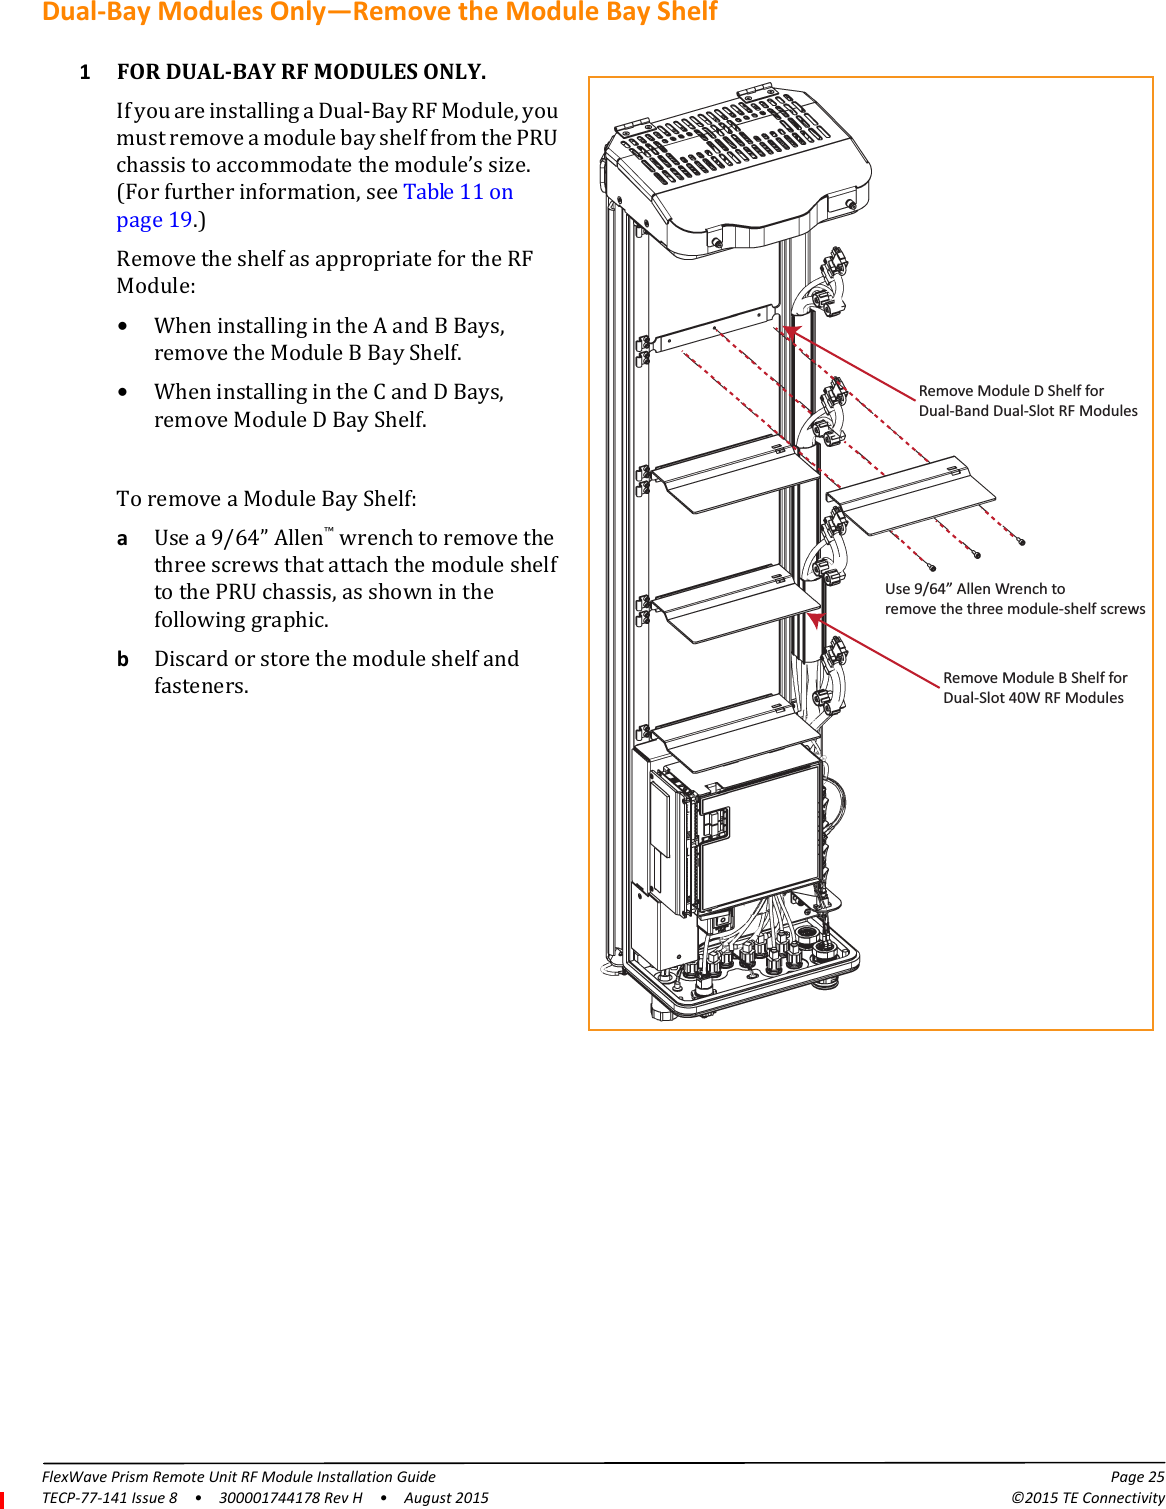 FlexWave Prism Remote Unit RF Module Installation Guide Page 25TECP-77-141 Issue 8  •  300001744178 Rev H  •  August 2015 ©2015 TE ConnectivityDual-Bay Modules Only—Remove the Module Bay Shelf1Use 9/64” Allen Wrench toremove the three module-shelf screwsRemove Module D Shelf forDual-Band Dual-Slot RF ModulesRemove Module B Shelf forDual-Slot 40W RF ModulesFOR DUAL-BAY RF MODULES ONLY.If you are installing a Dual-Bay RF Module, you must remove a module bay shelf from the PRU chassis to accommodate the module’s size. (For further information, see Table 11 on page 19.)Remove the shelf as appropriate for the RF Module:•When installing in the A and B Bays, remove the Module B Bay Shelf.•When installing in the C and D Bays, remove Module D Bay Shelf.To remove a Module Bay Shelf:aUse a 9/64” Allen™ wrench to remove the three screws that attach the module shelf to the PRU chassis, as shown in the following graphic.bDiscard or store the module shelf and fasteners.